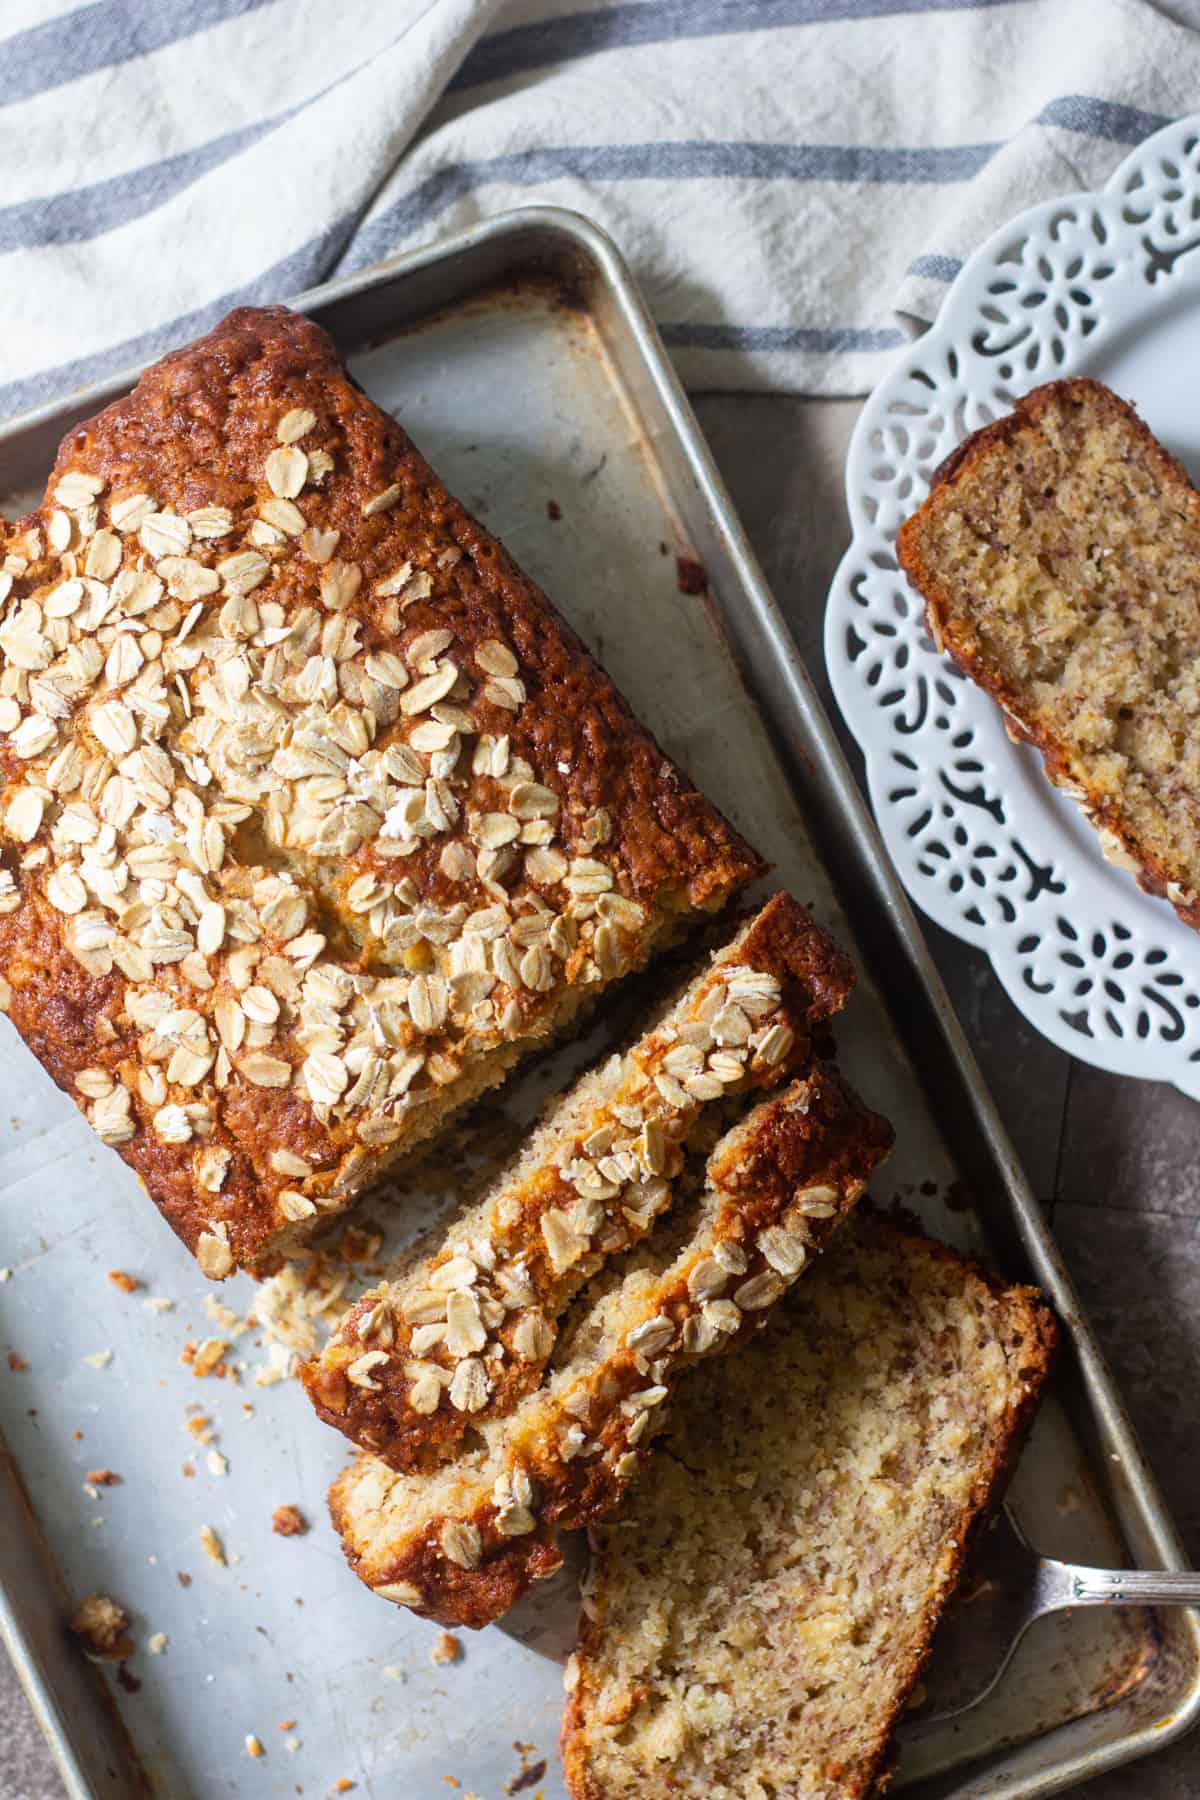 Oatmeal banana bread is the perfect recipe for a quick, simple and light breakfast. Read on for step-by-step directions!
